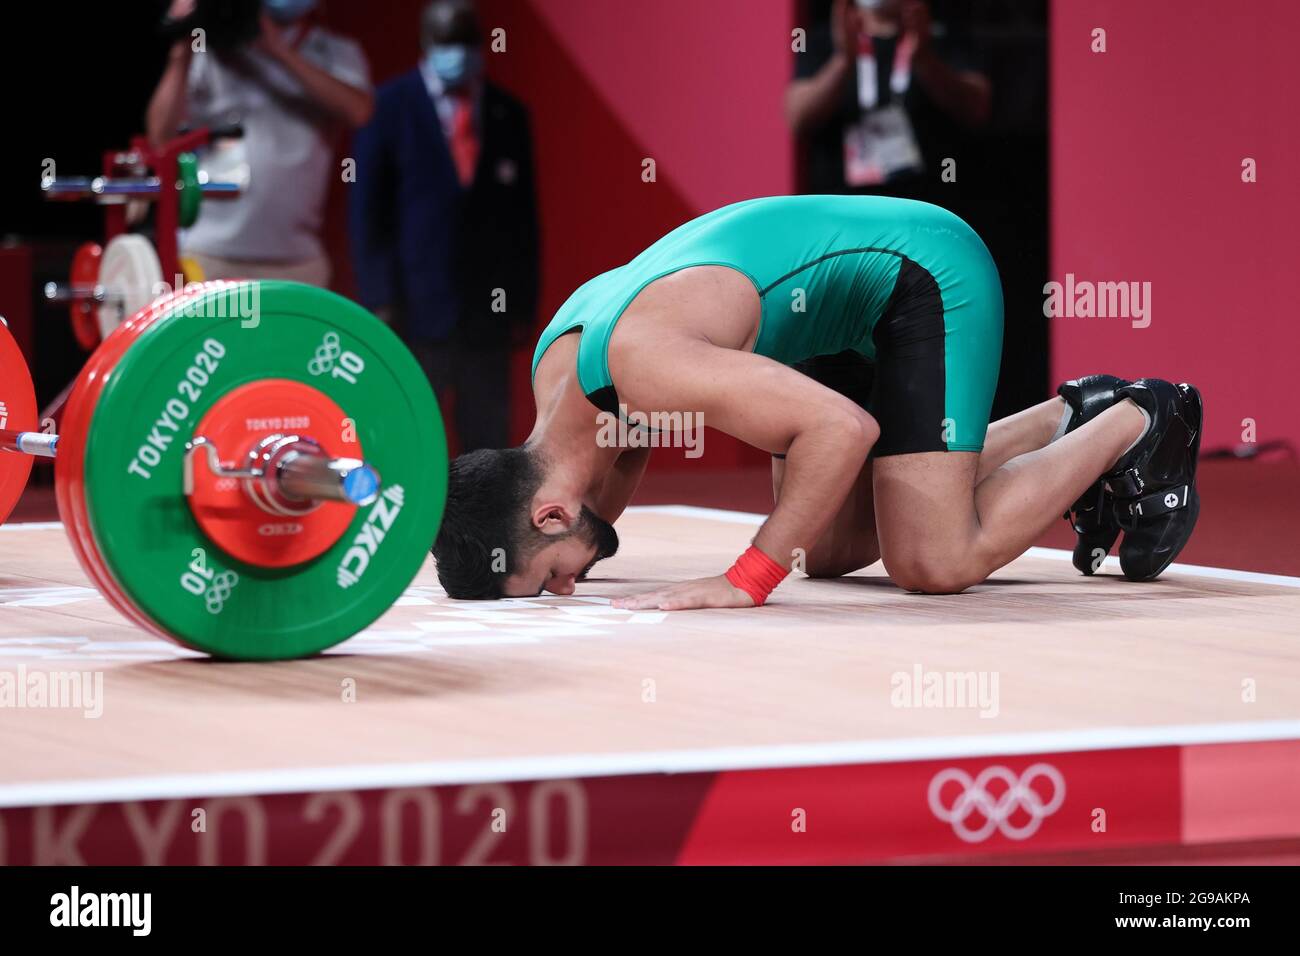 (210725) -- TOKYO, July 25, 2021 (Xinhua) -- Talha Talib of Pakistan reacts during the men's 67kg weightlifting event of the Tokyo 2020 Olympic Games in Tokyo, Japan, July 25, 2021. (Xinhua/Yang Lei) Stock Photo